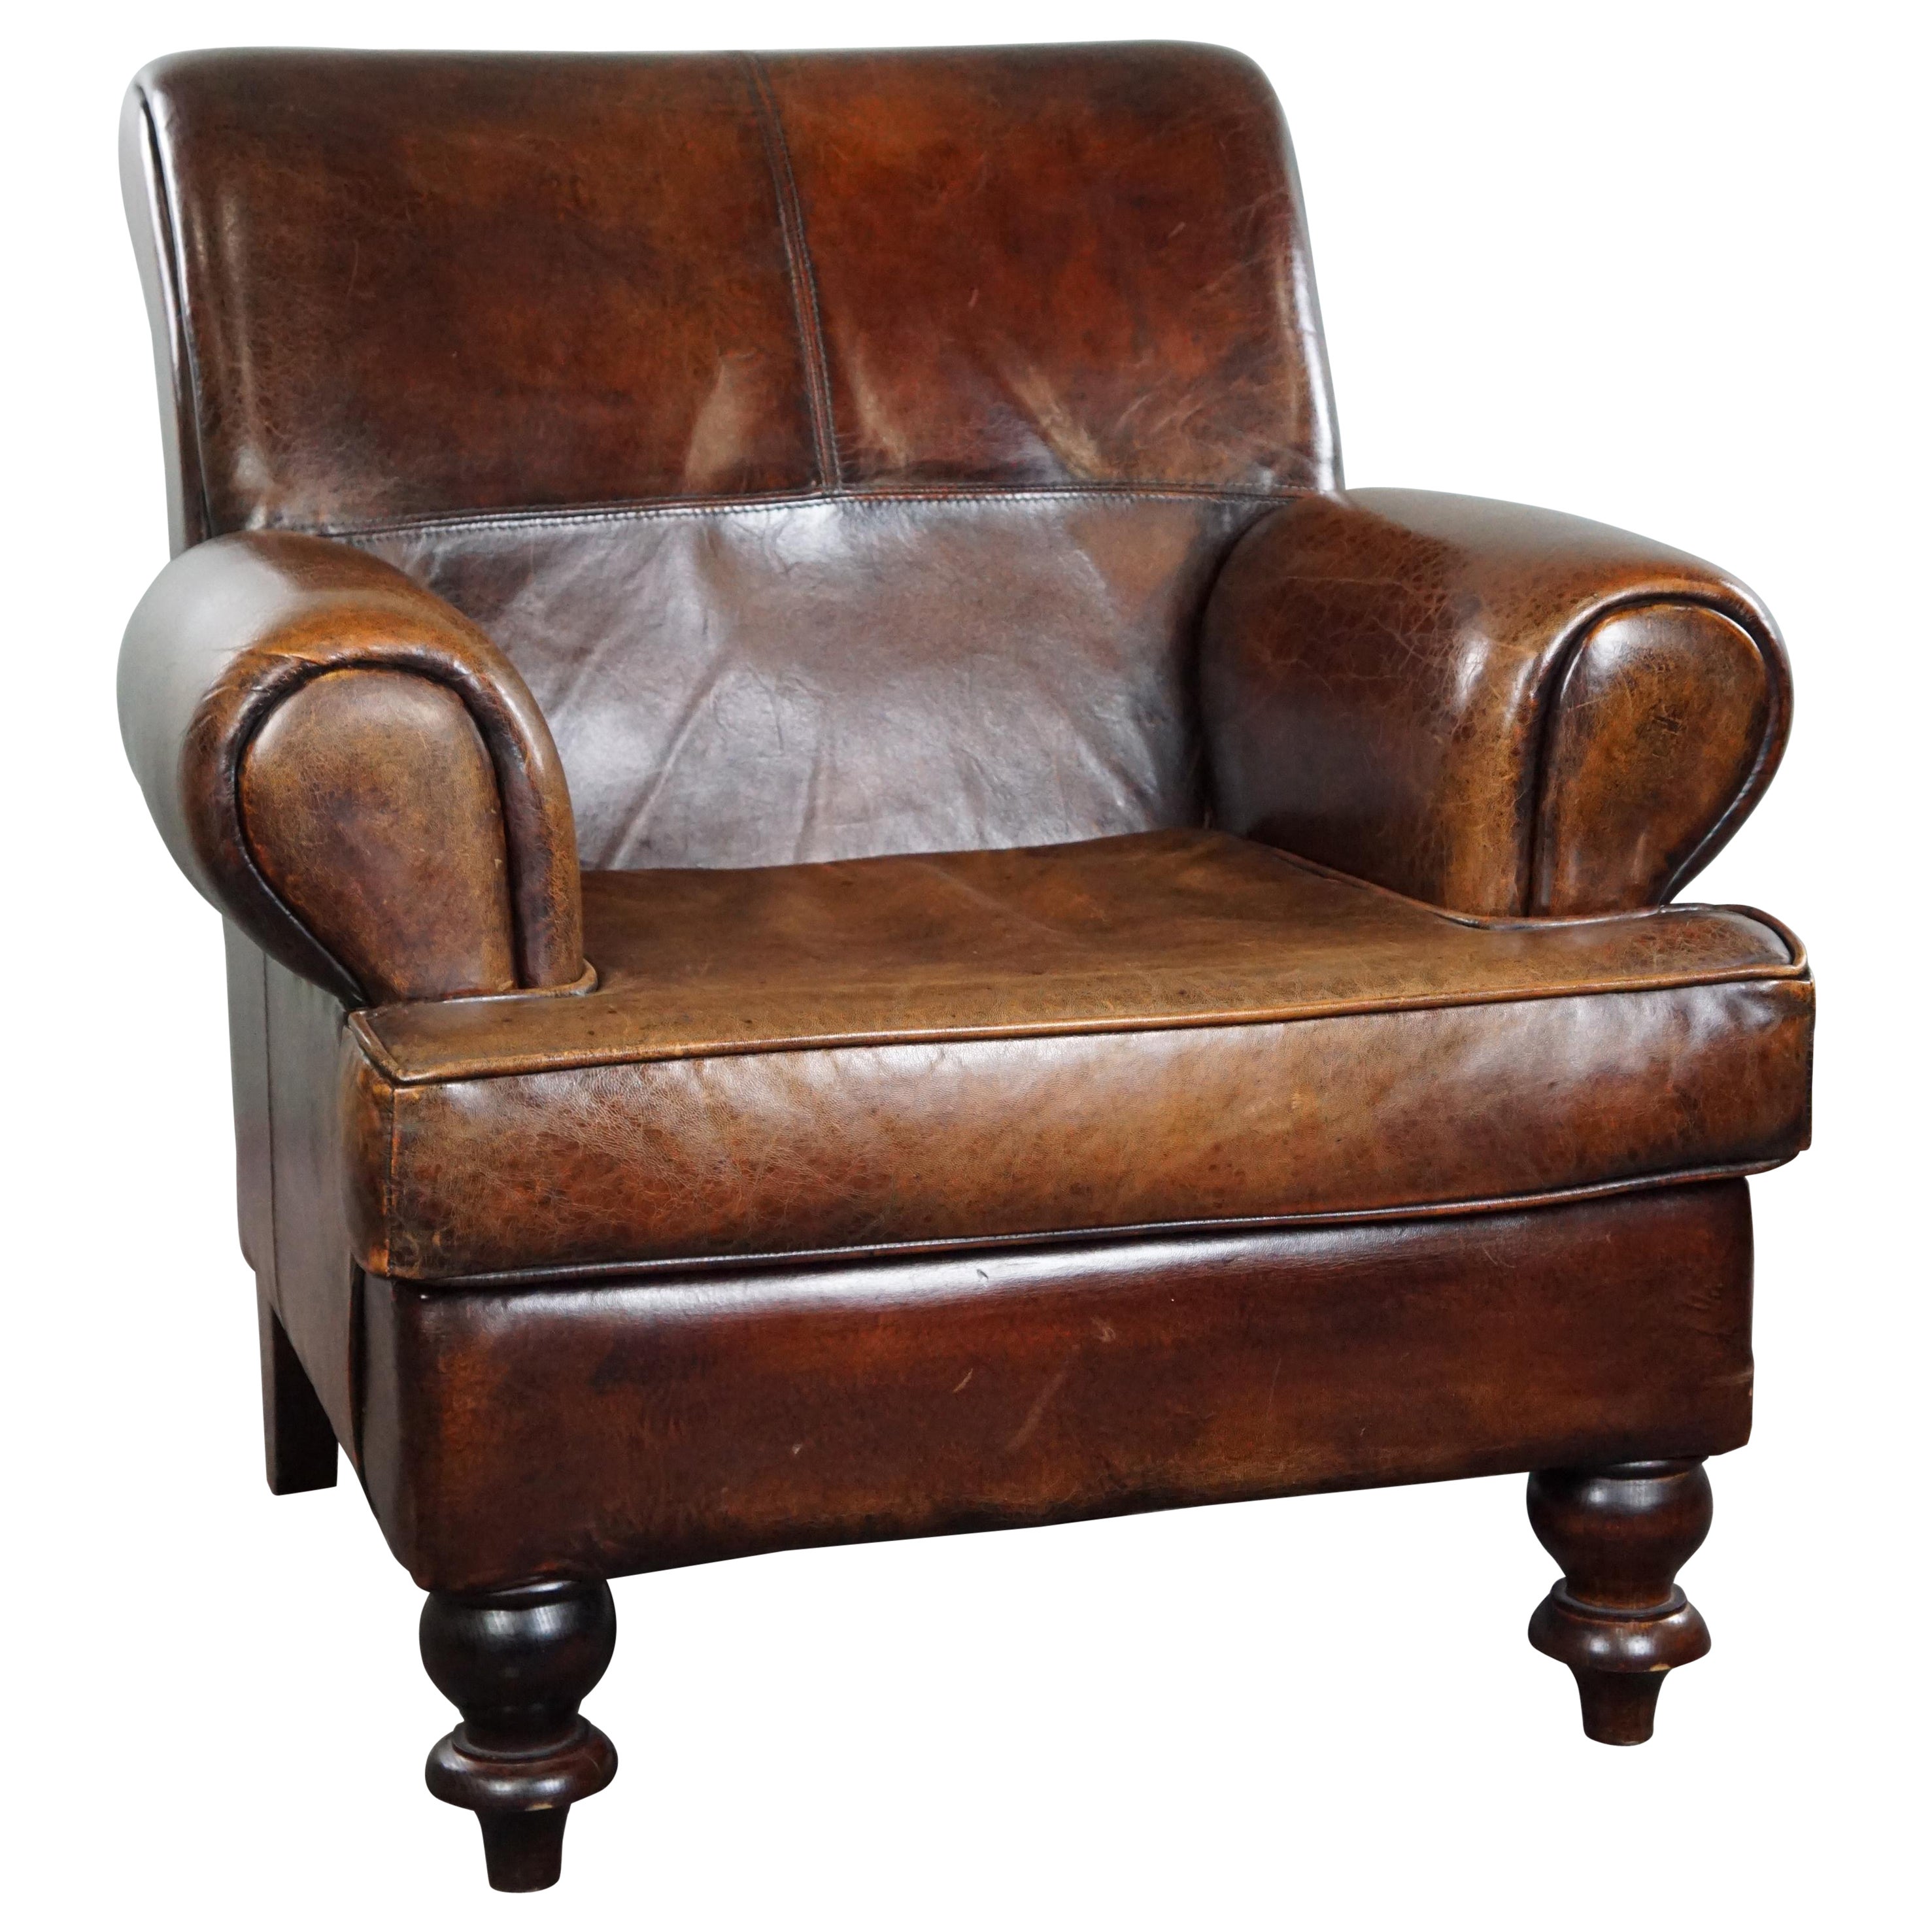 Spacious sheepskin armchair with a relaxed deep seat